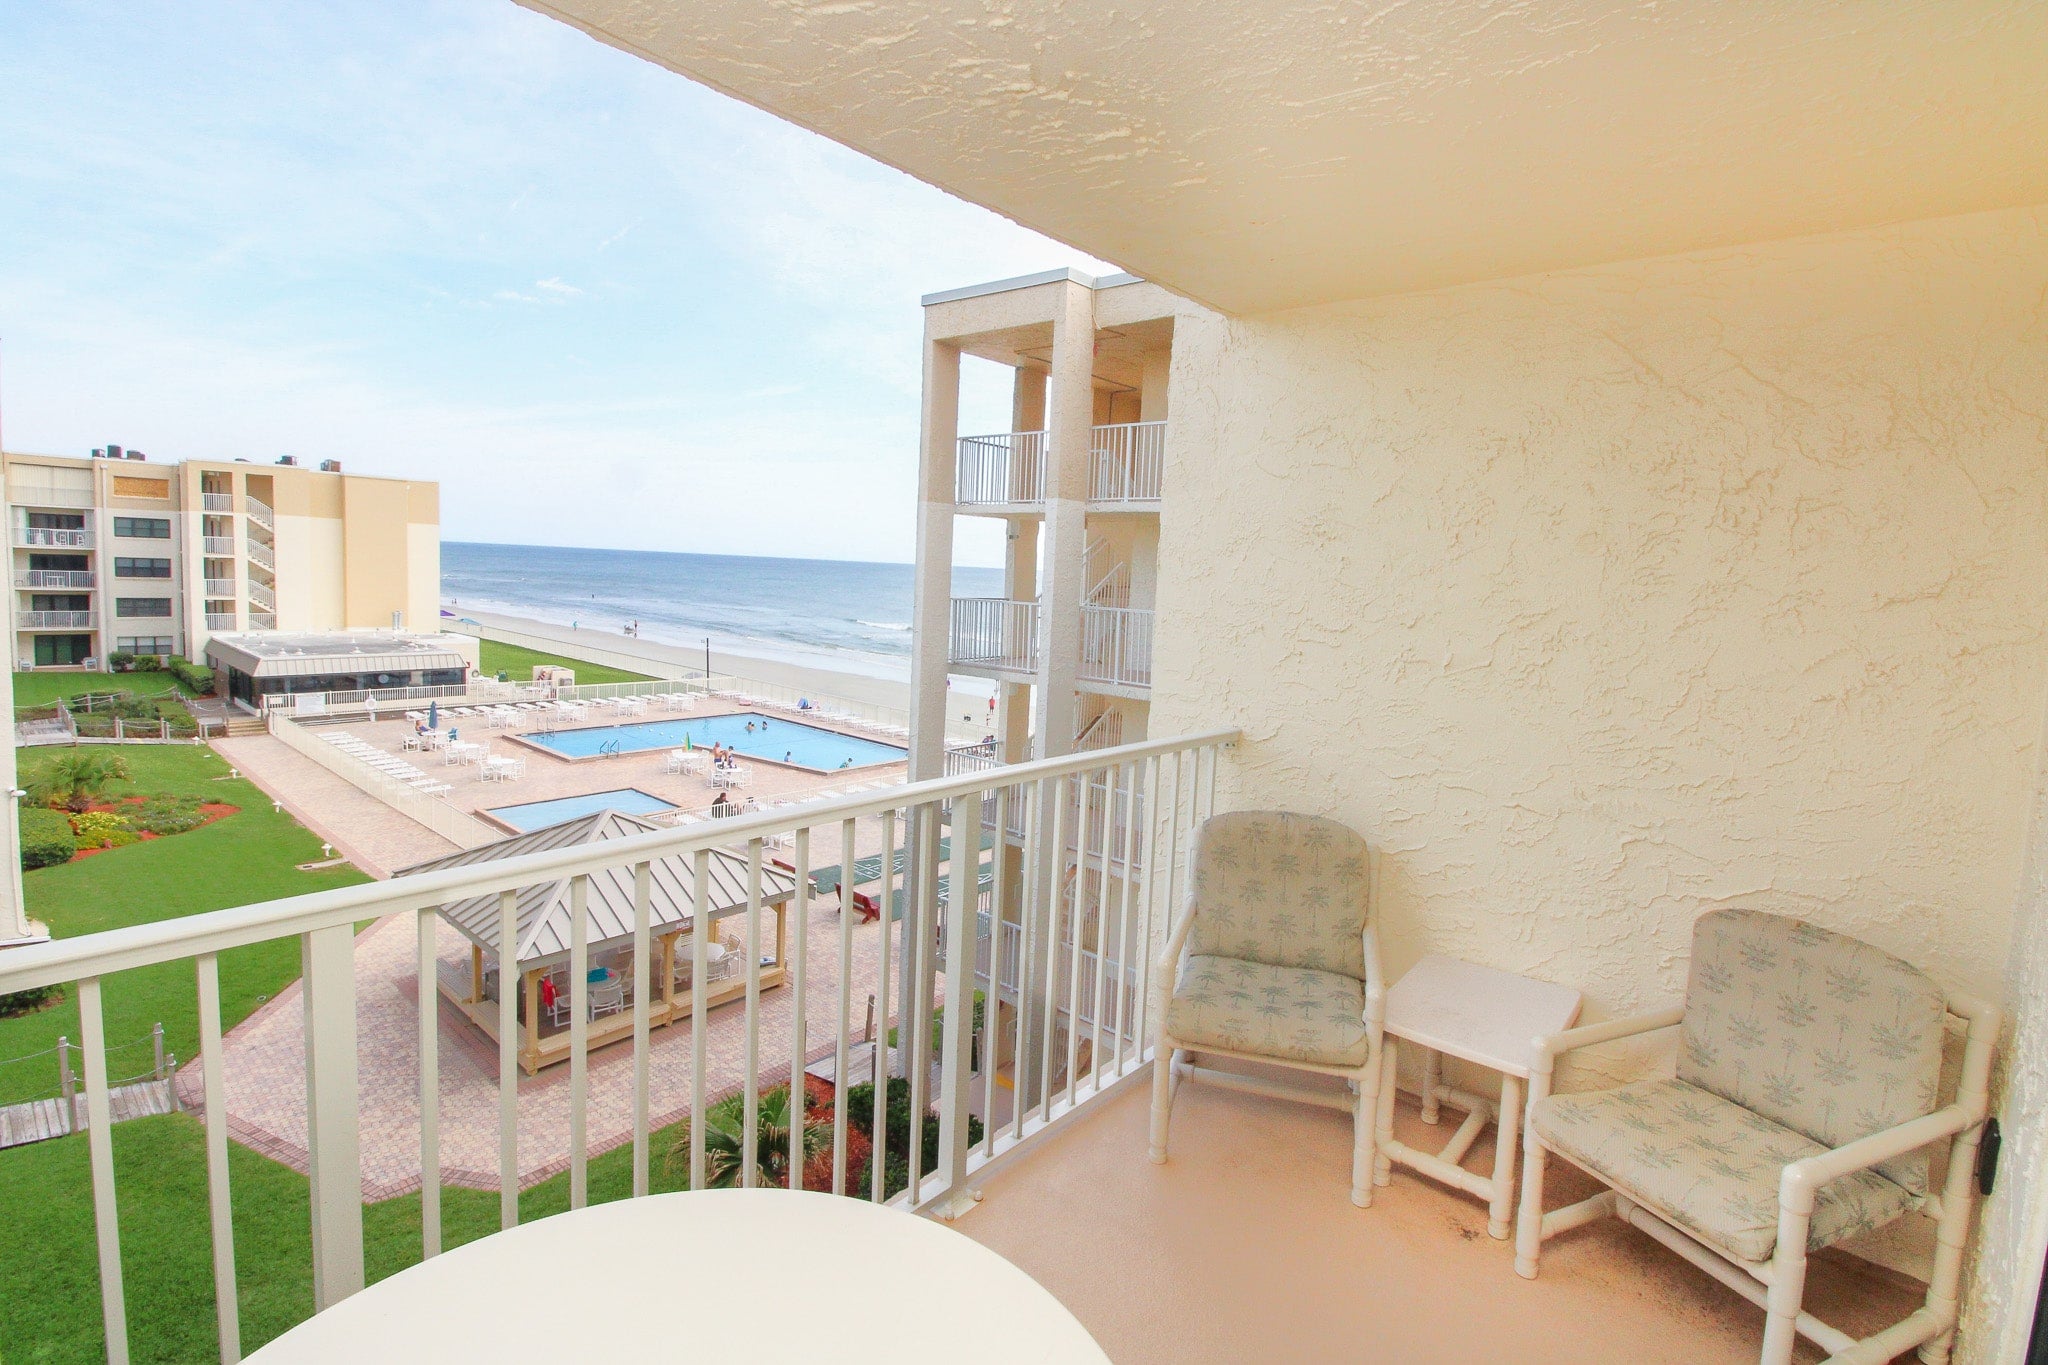 Furnished balcony with ocean view